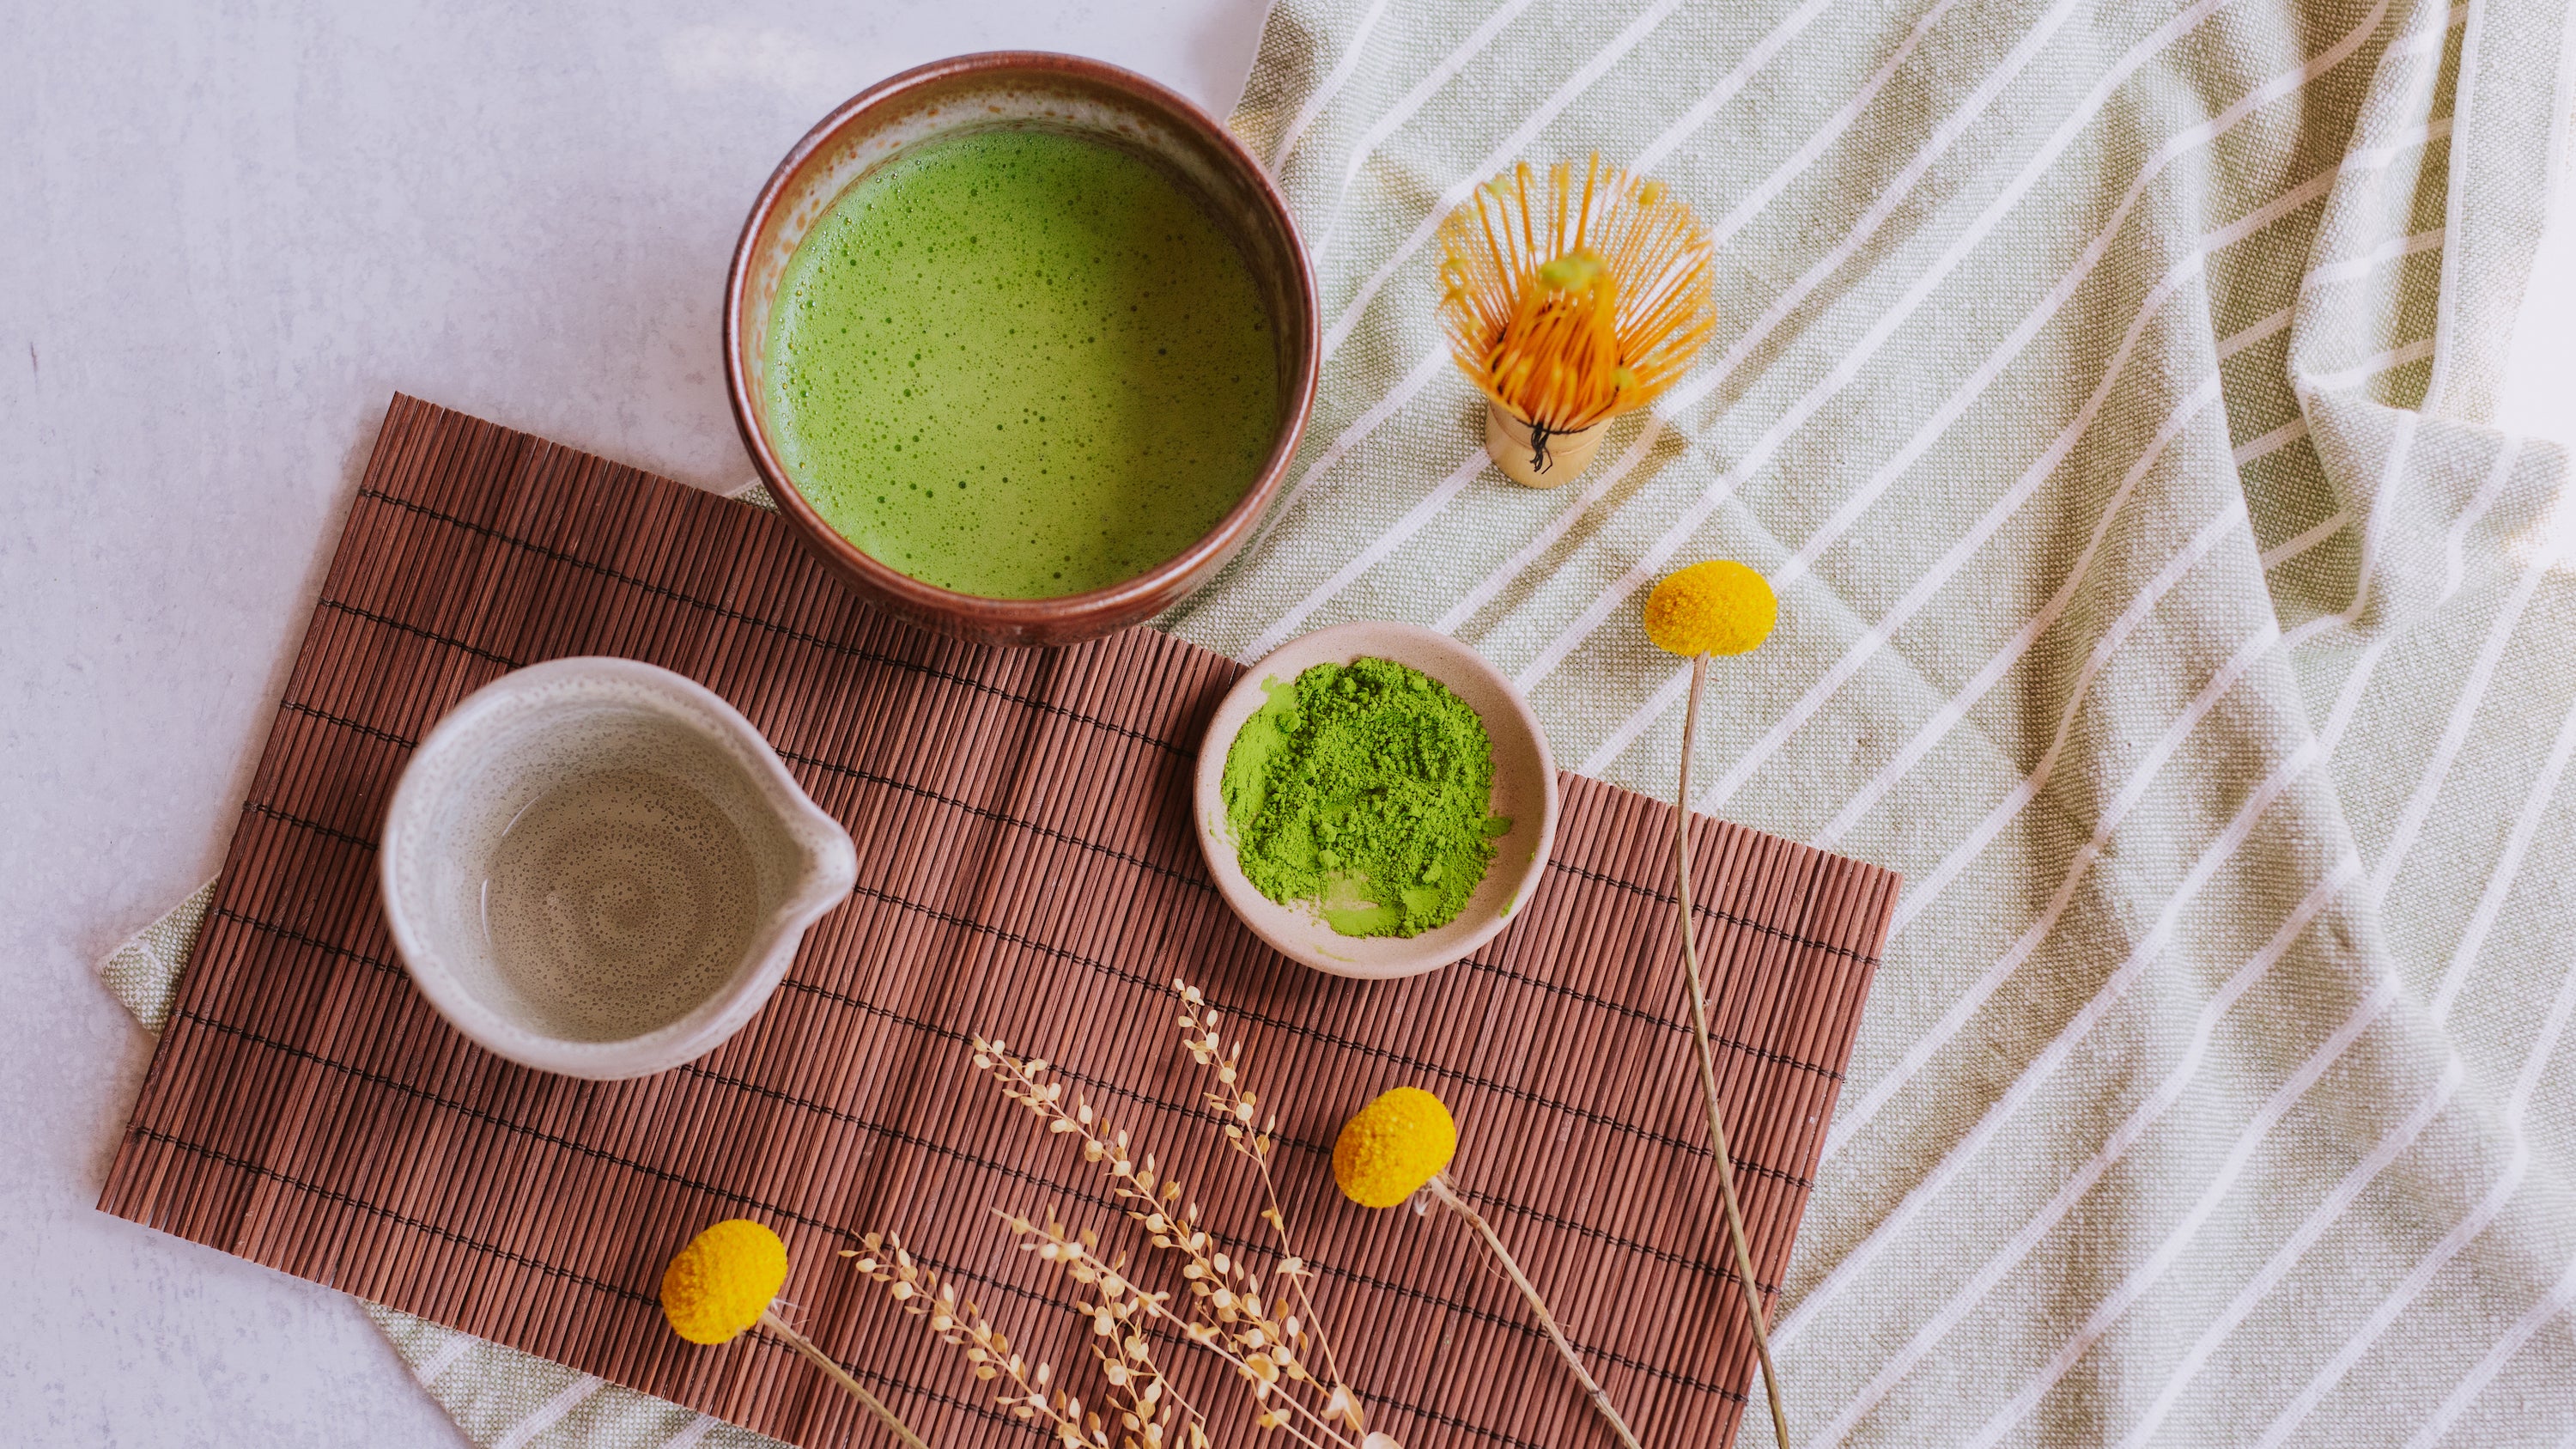 bowl of whisked matcha next to a matcha whisk, dish of matcha powder, and small pitcher of water